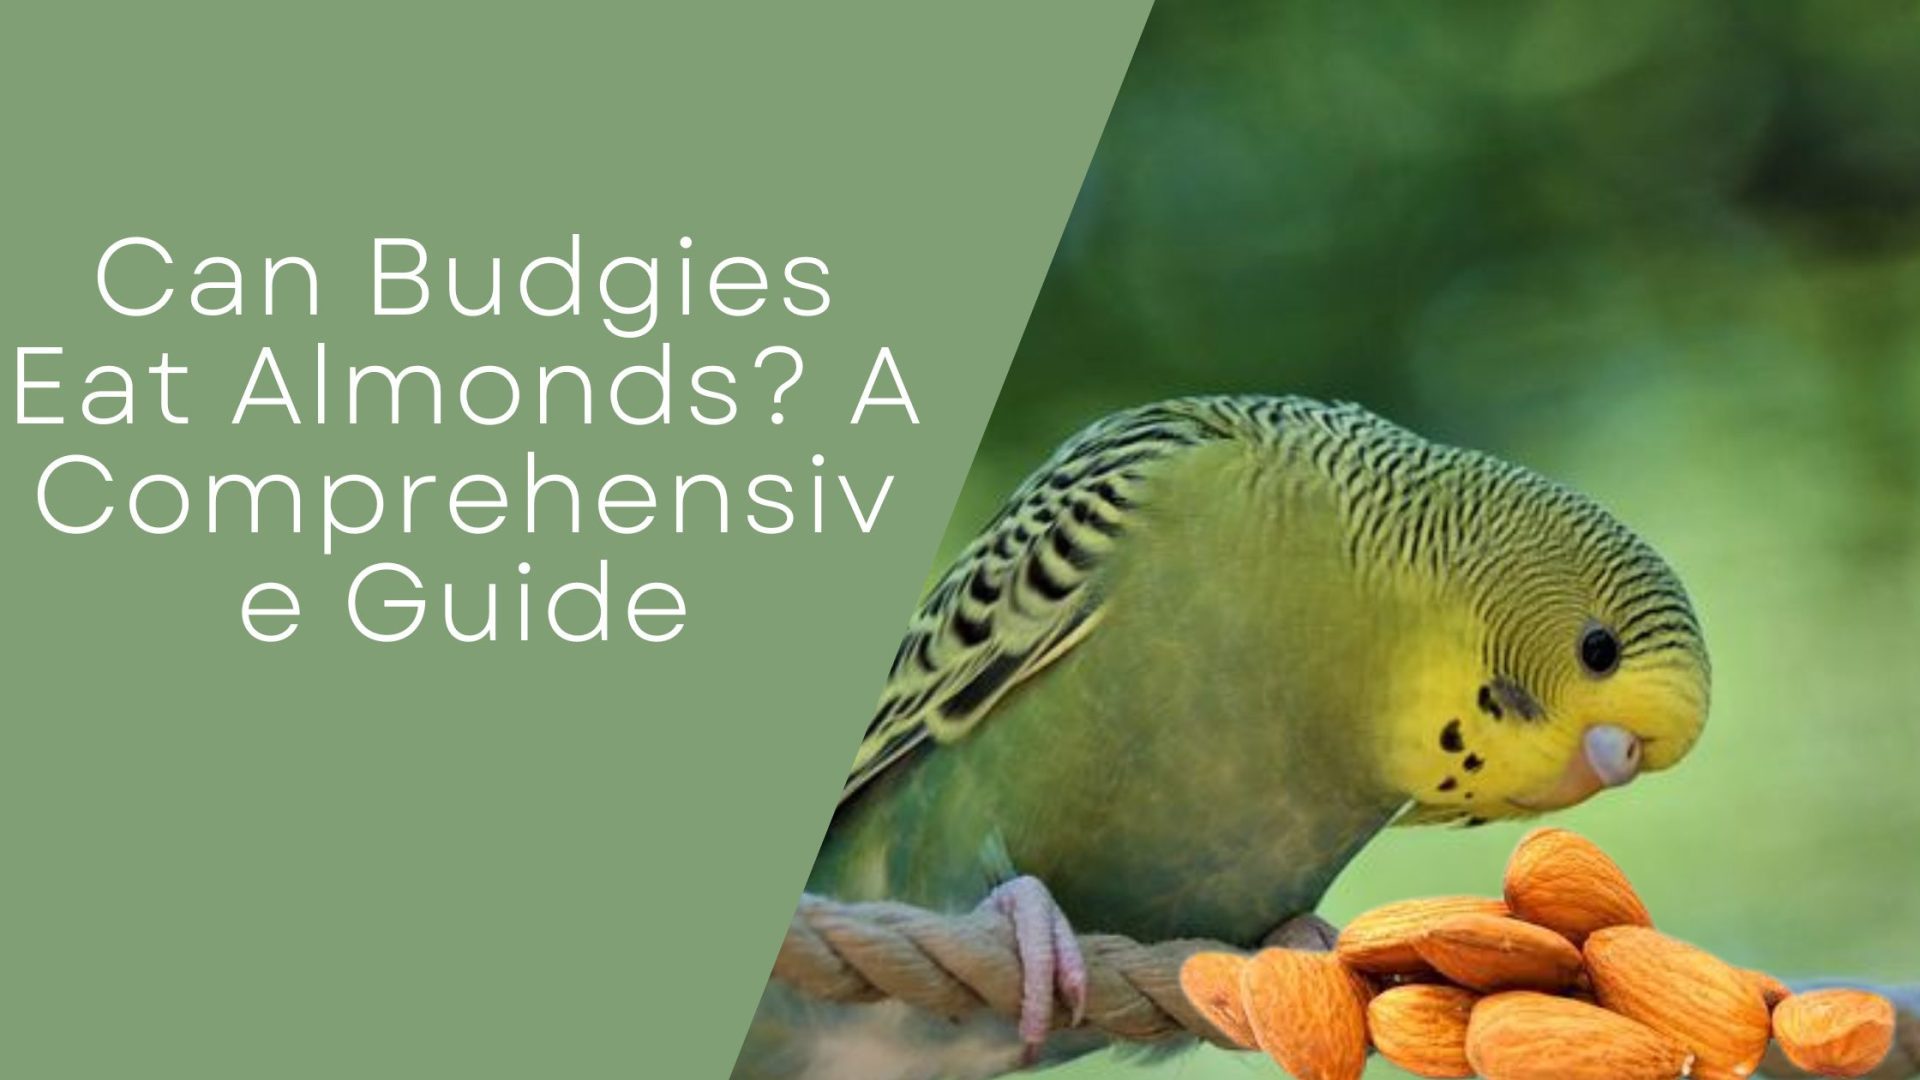 Can Budgies Eat Almonds